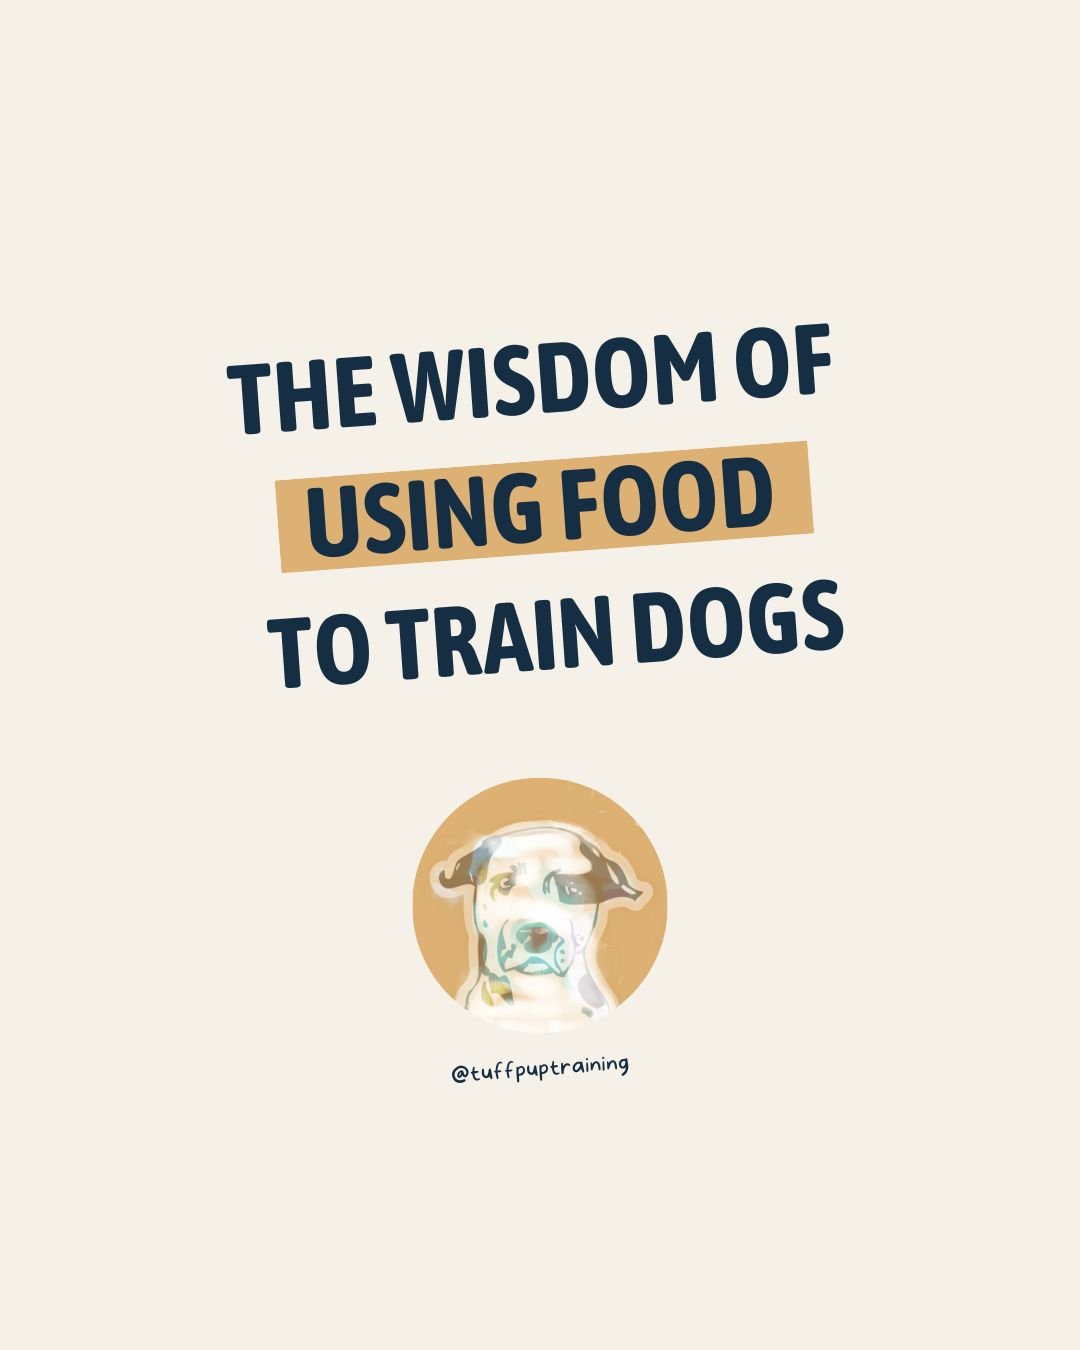 The Wisdom of using food to train dogs - IG Post.jpg